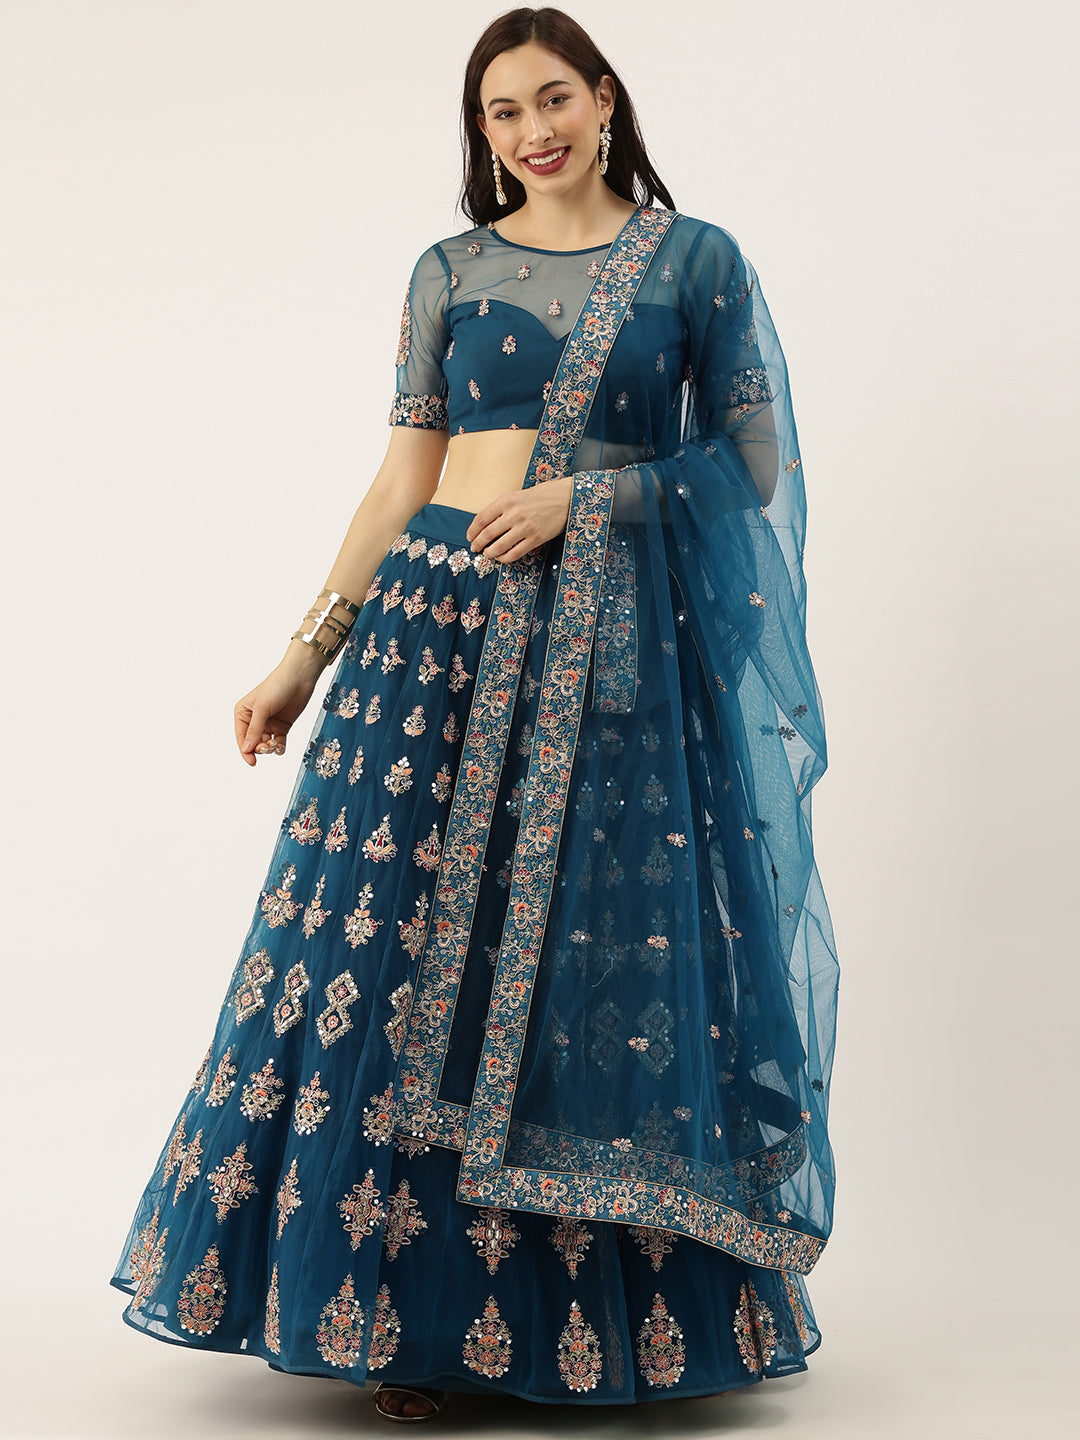 Women's Teal Colour Net With Miror Work Fully Stitched Lehenga & Blouse With Dupatta - Royal Dwells